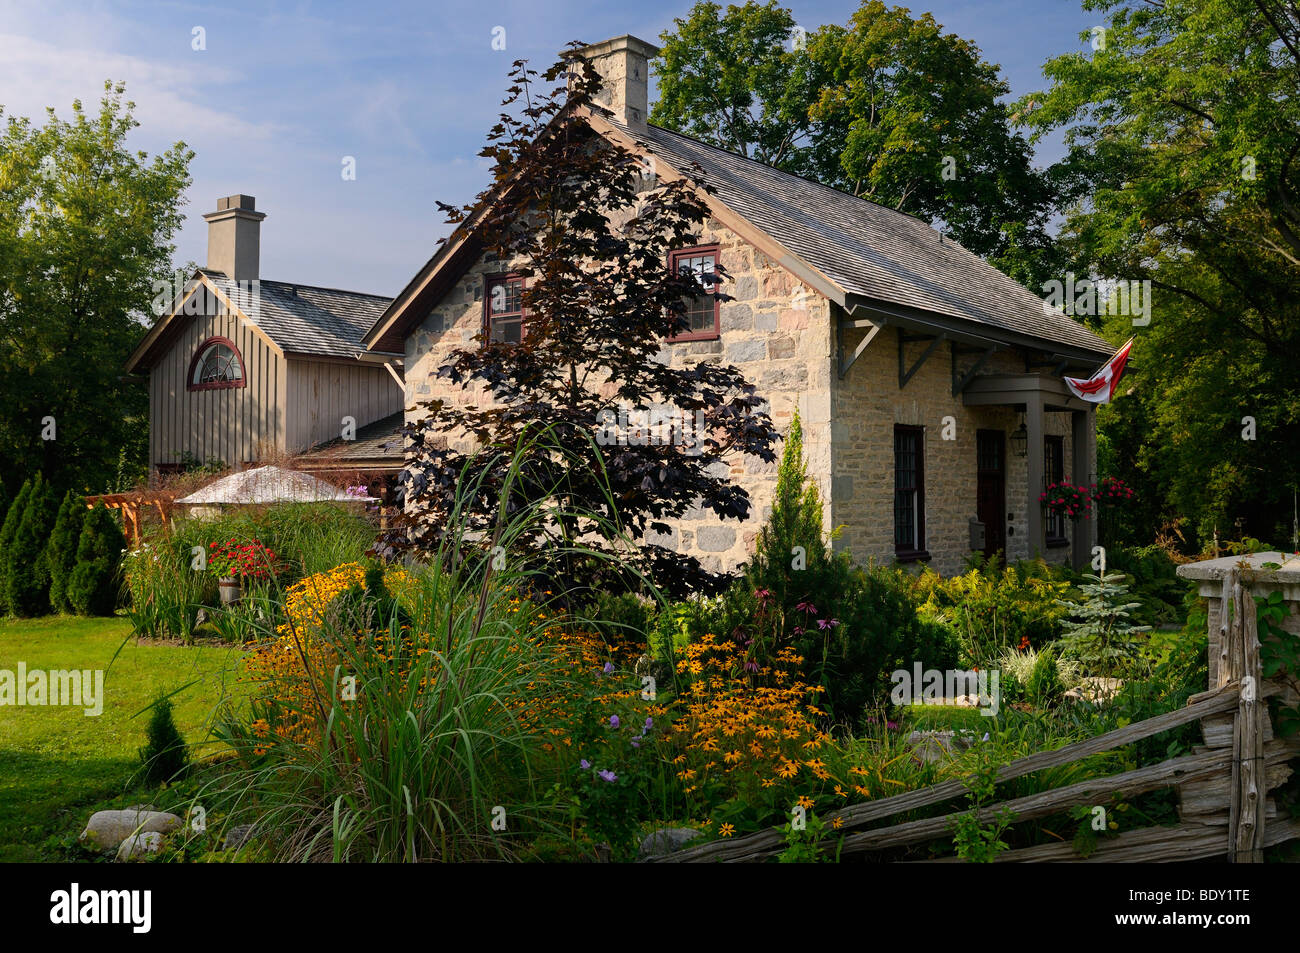 Historic heritage stone house with garden in Kitchener Ontario Canada Stock Photo